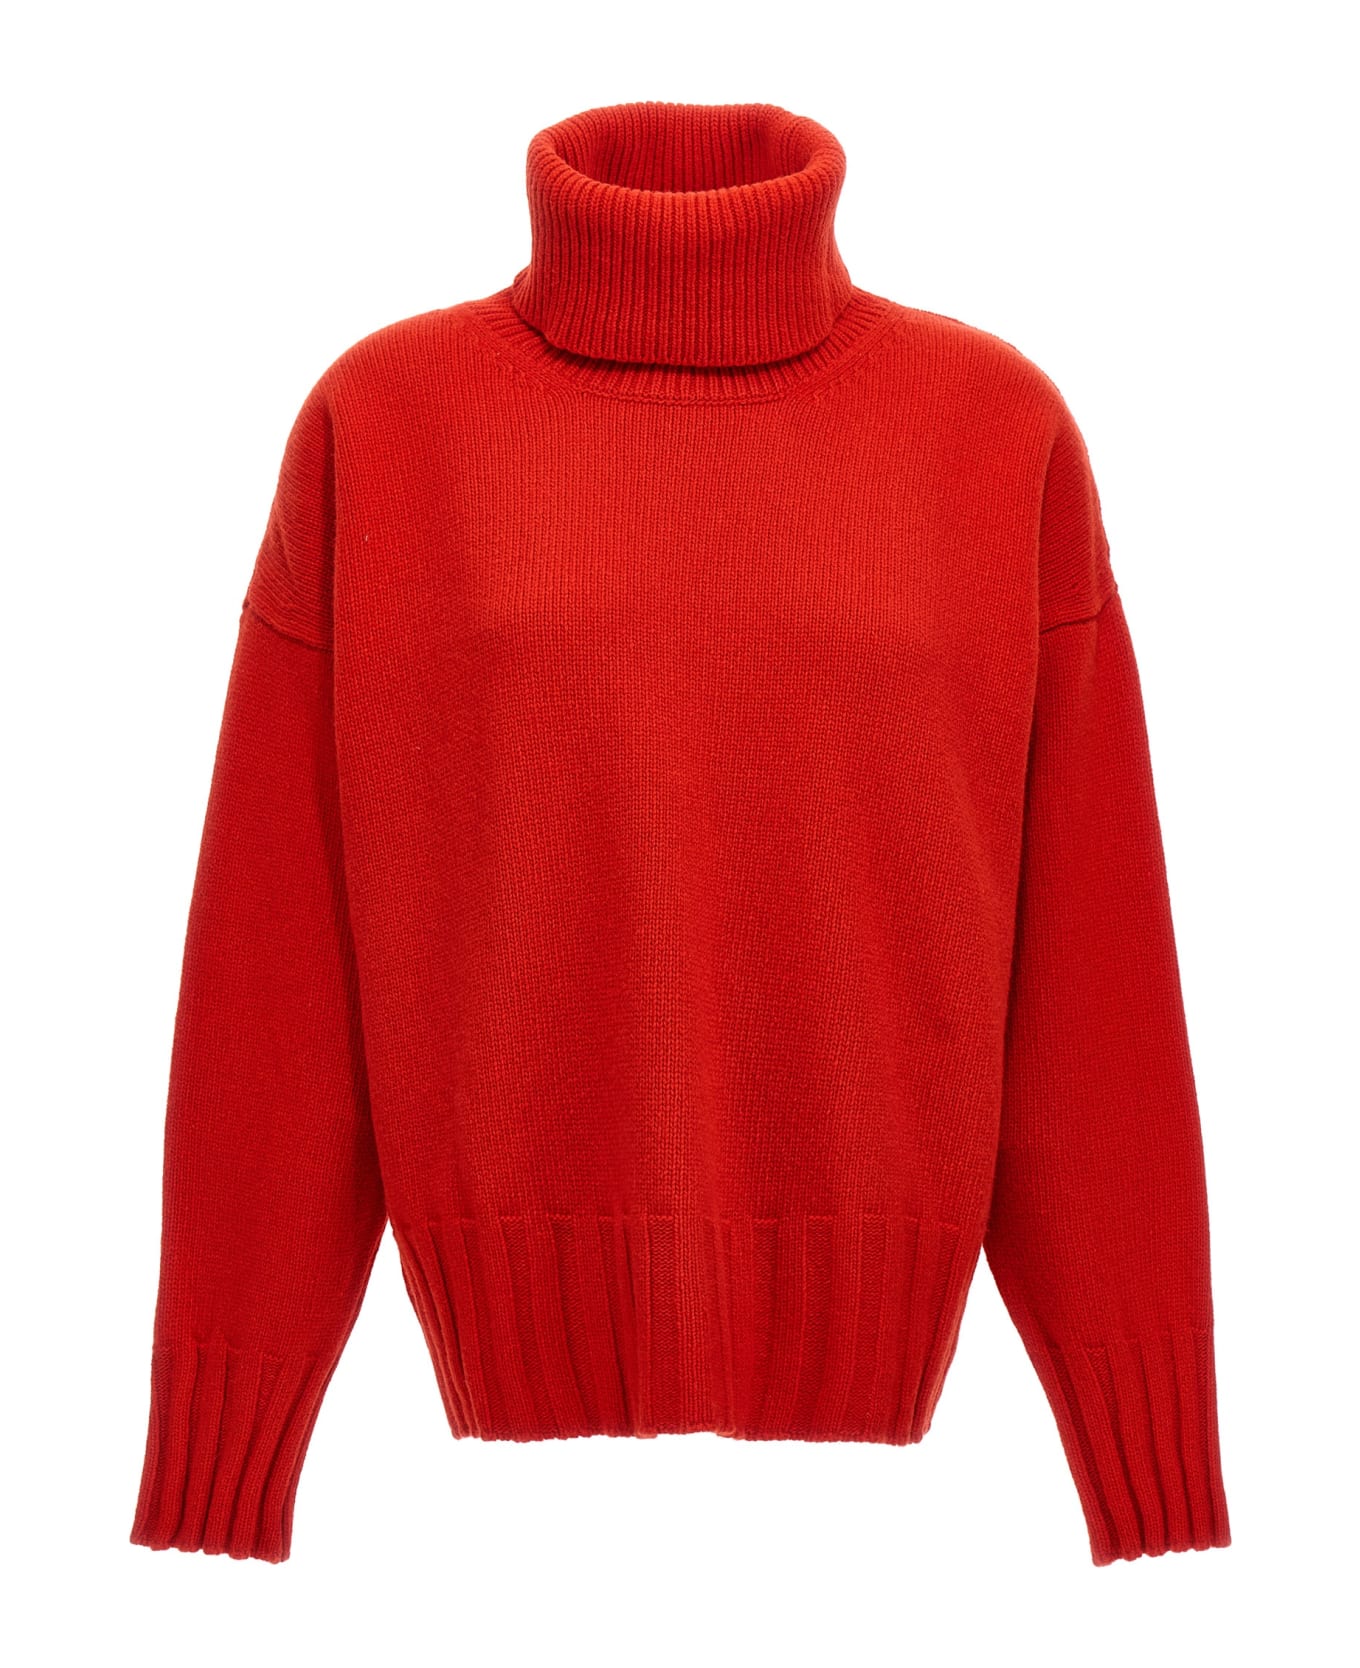 Made in Tomboy 'ely' Sweater - Red ニットウェア